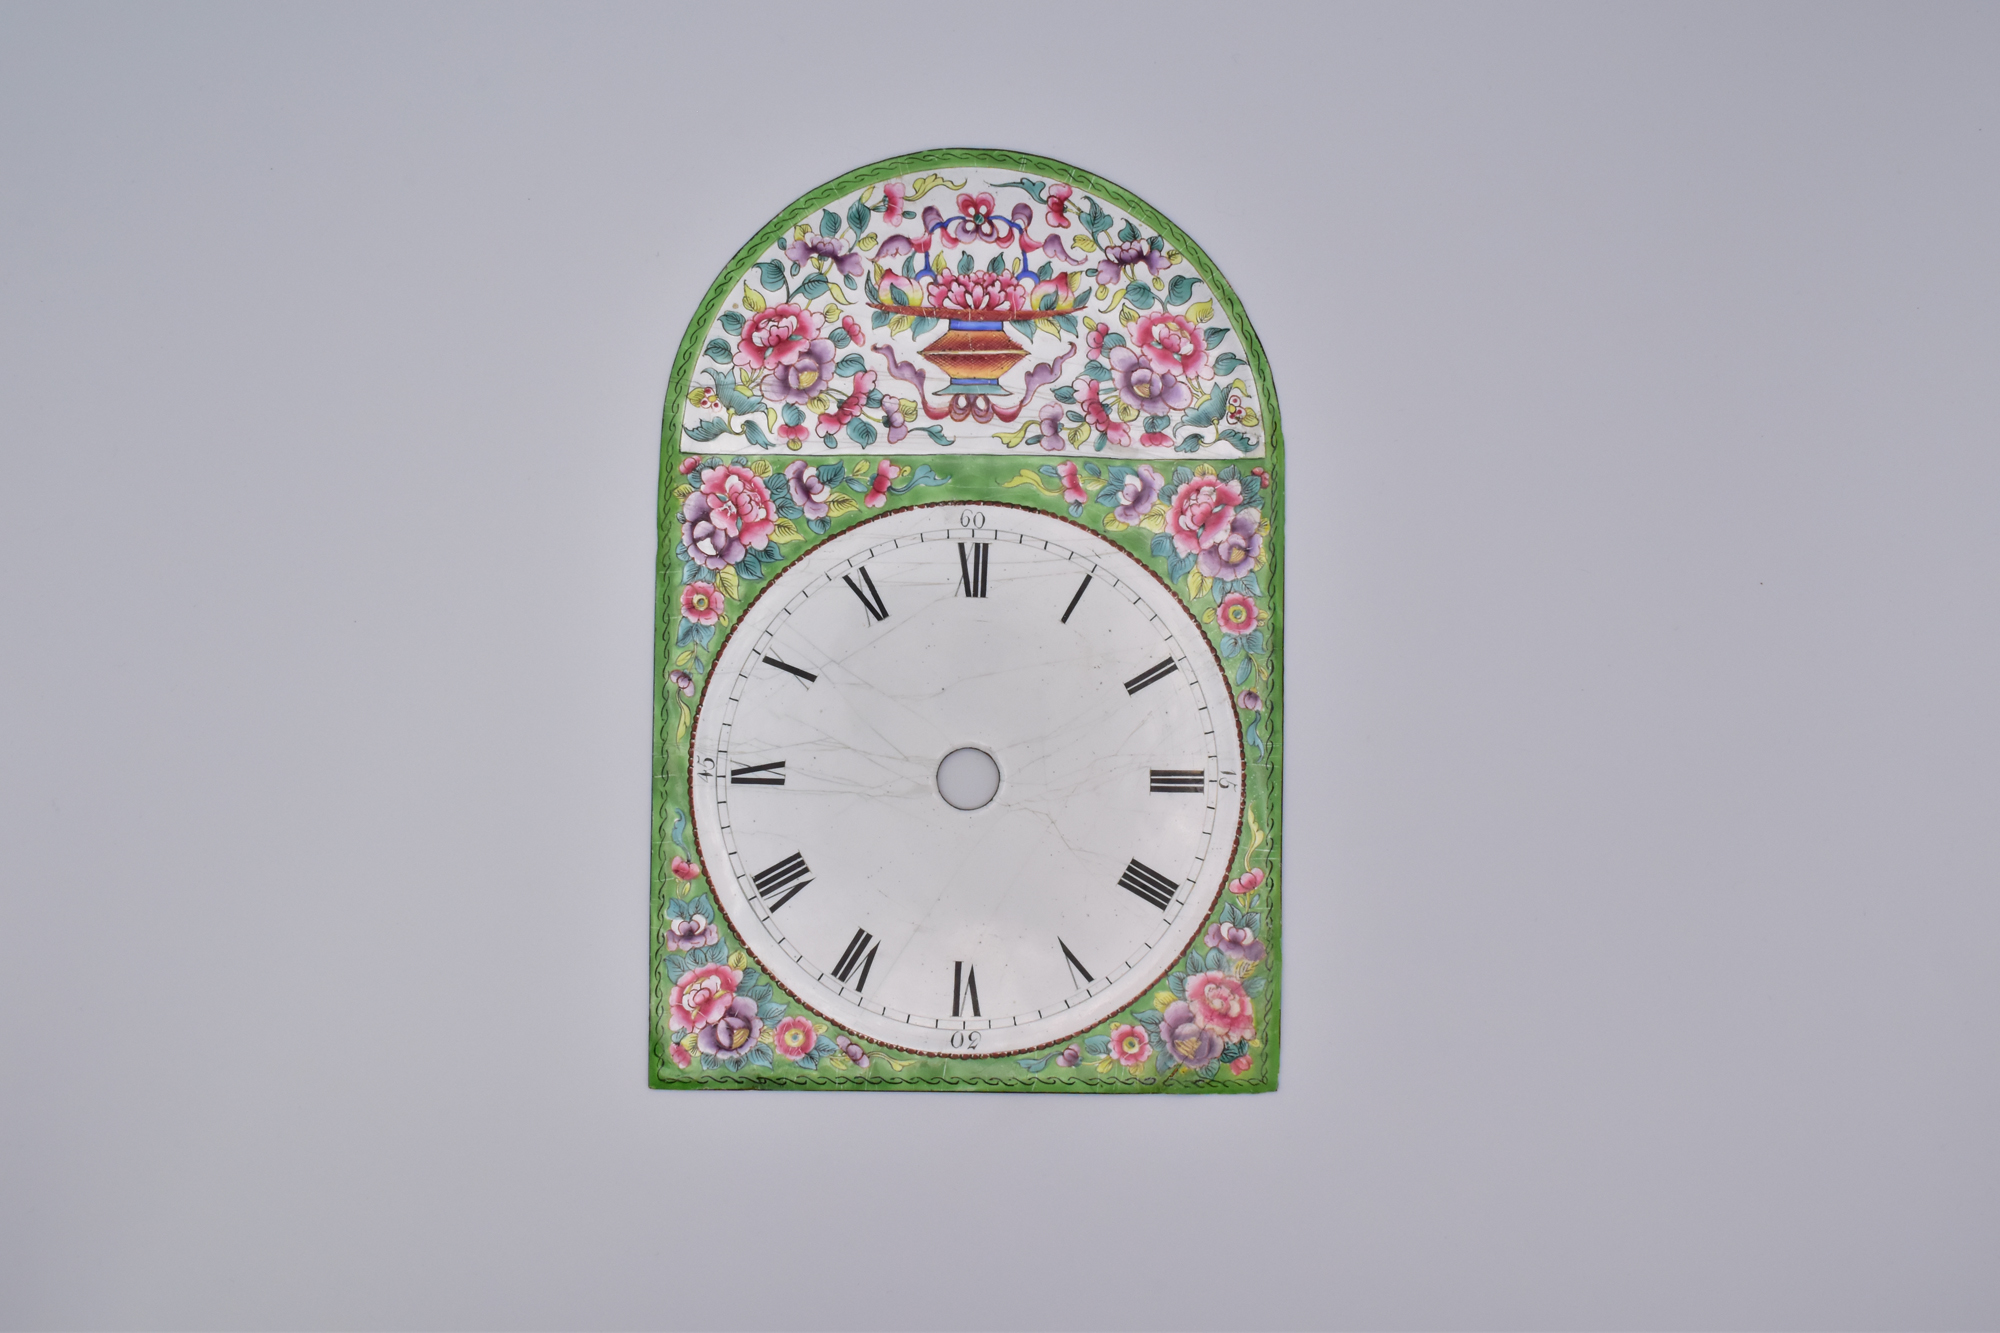 A RARE CANTON ENAMEL CLOCK FACE, QING DYNASTY, LATE 18TH/EARLY 19TH CENTURY